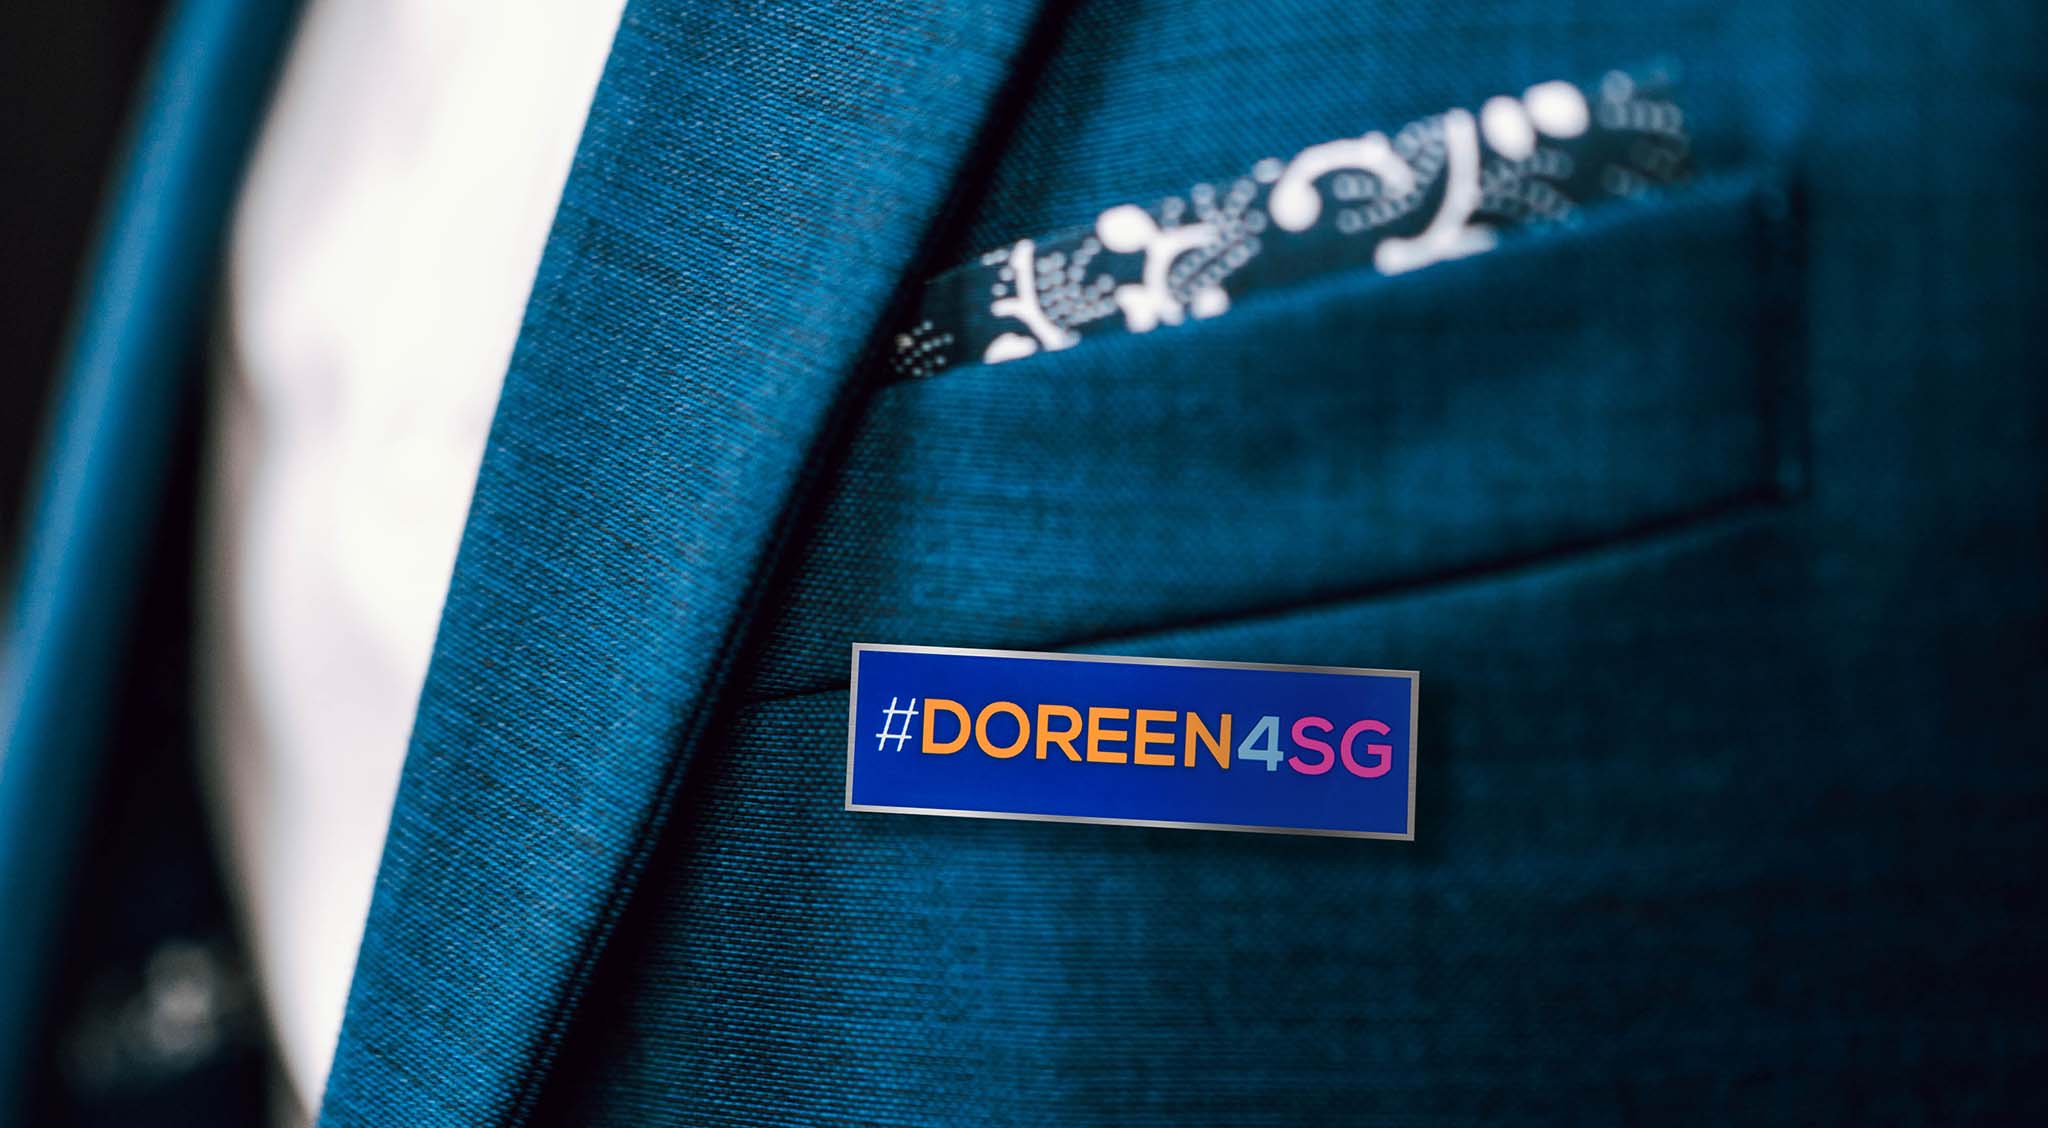 Image showing a lapel pin tag on a jacket as part of a digital and print marketing campaign run by SmartCuts Creative in Lausanne and Geneva, Switzerland for the US Mission to the United Nations